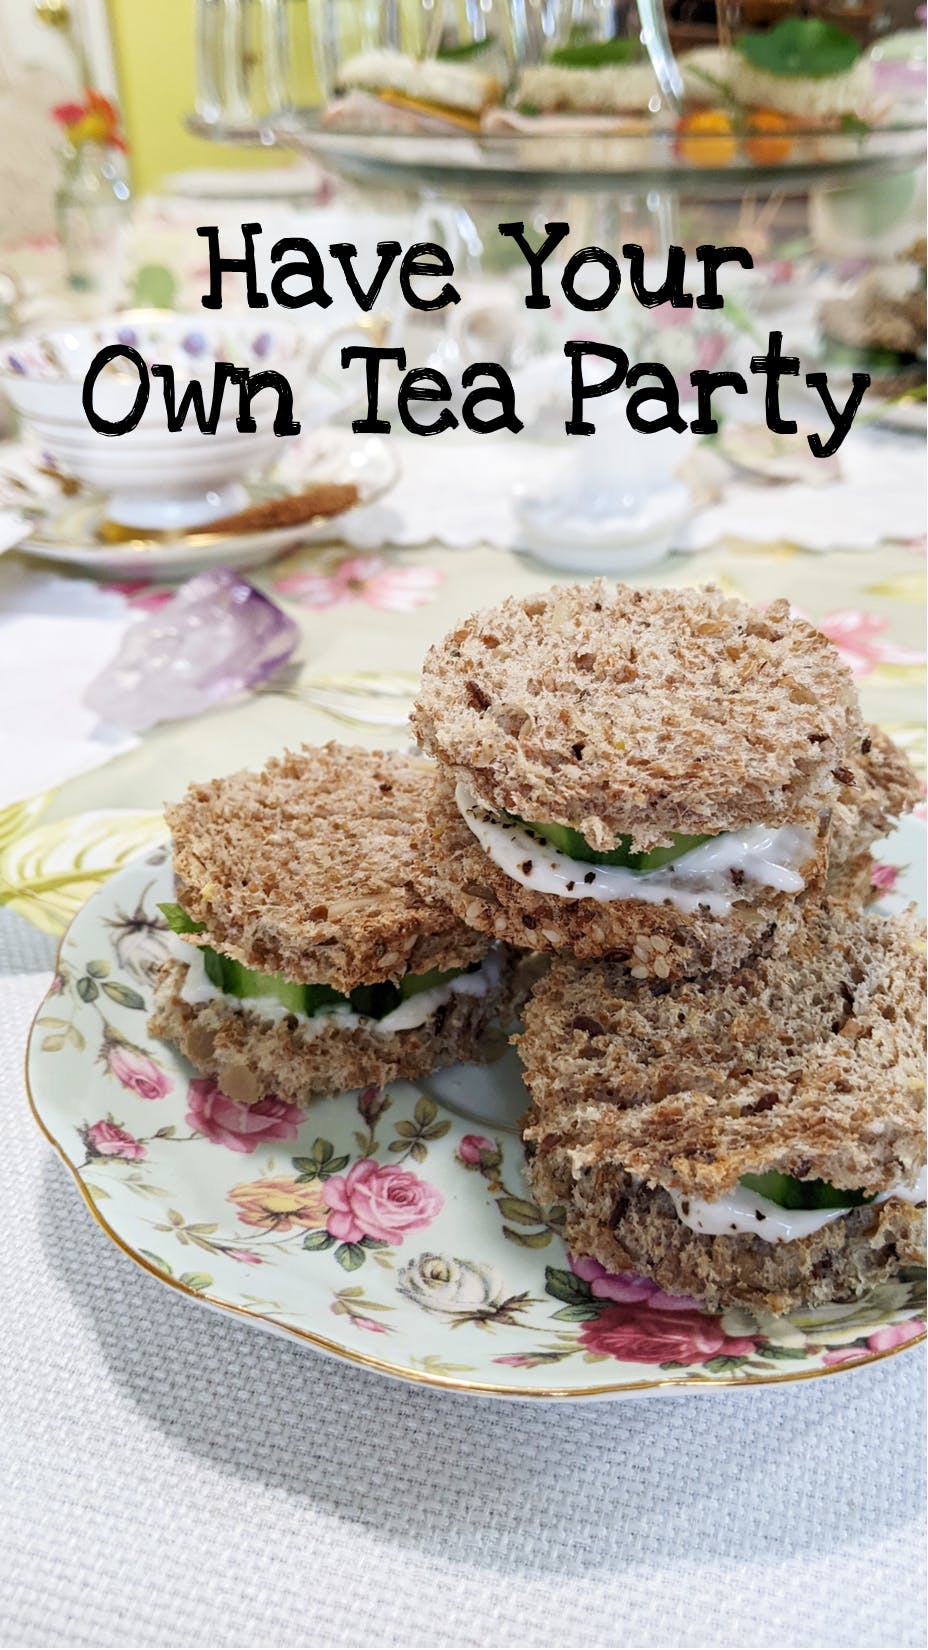 Have Your Own Tea Party